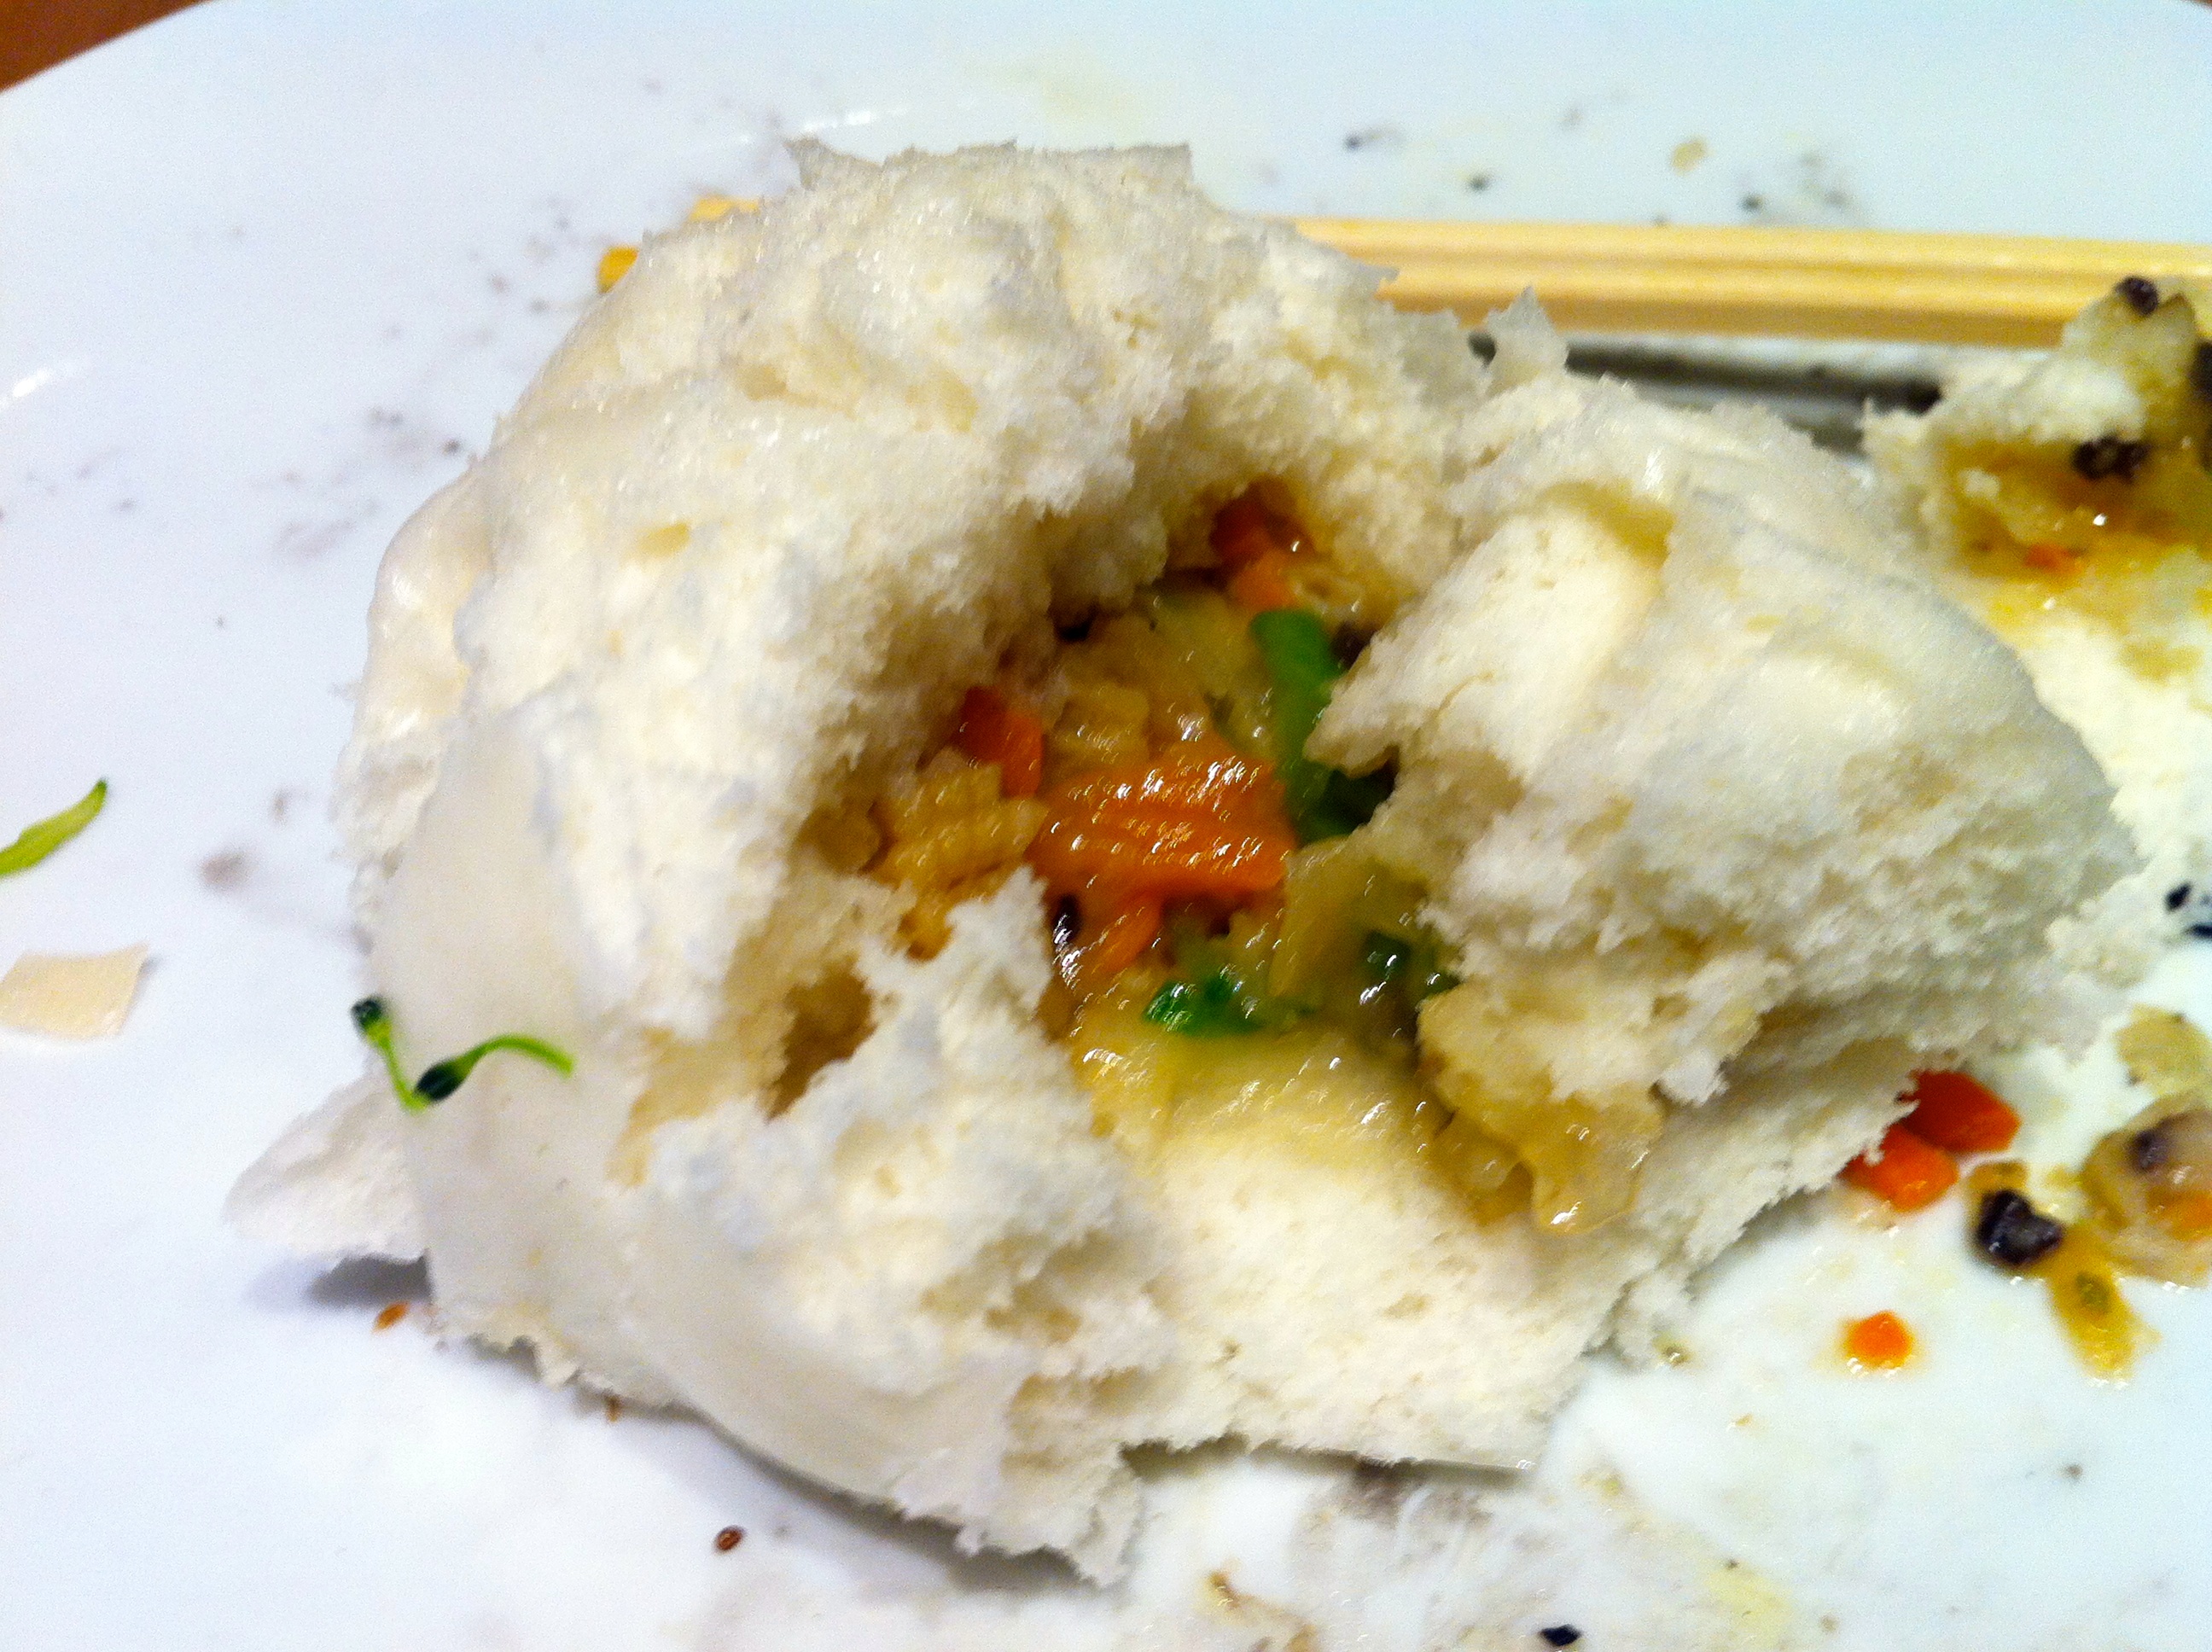 Vegetable steamed buns, Ping Pong, Westfield, Stratford